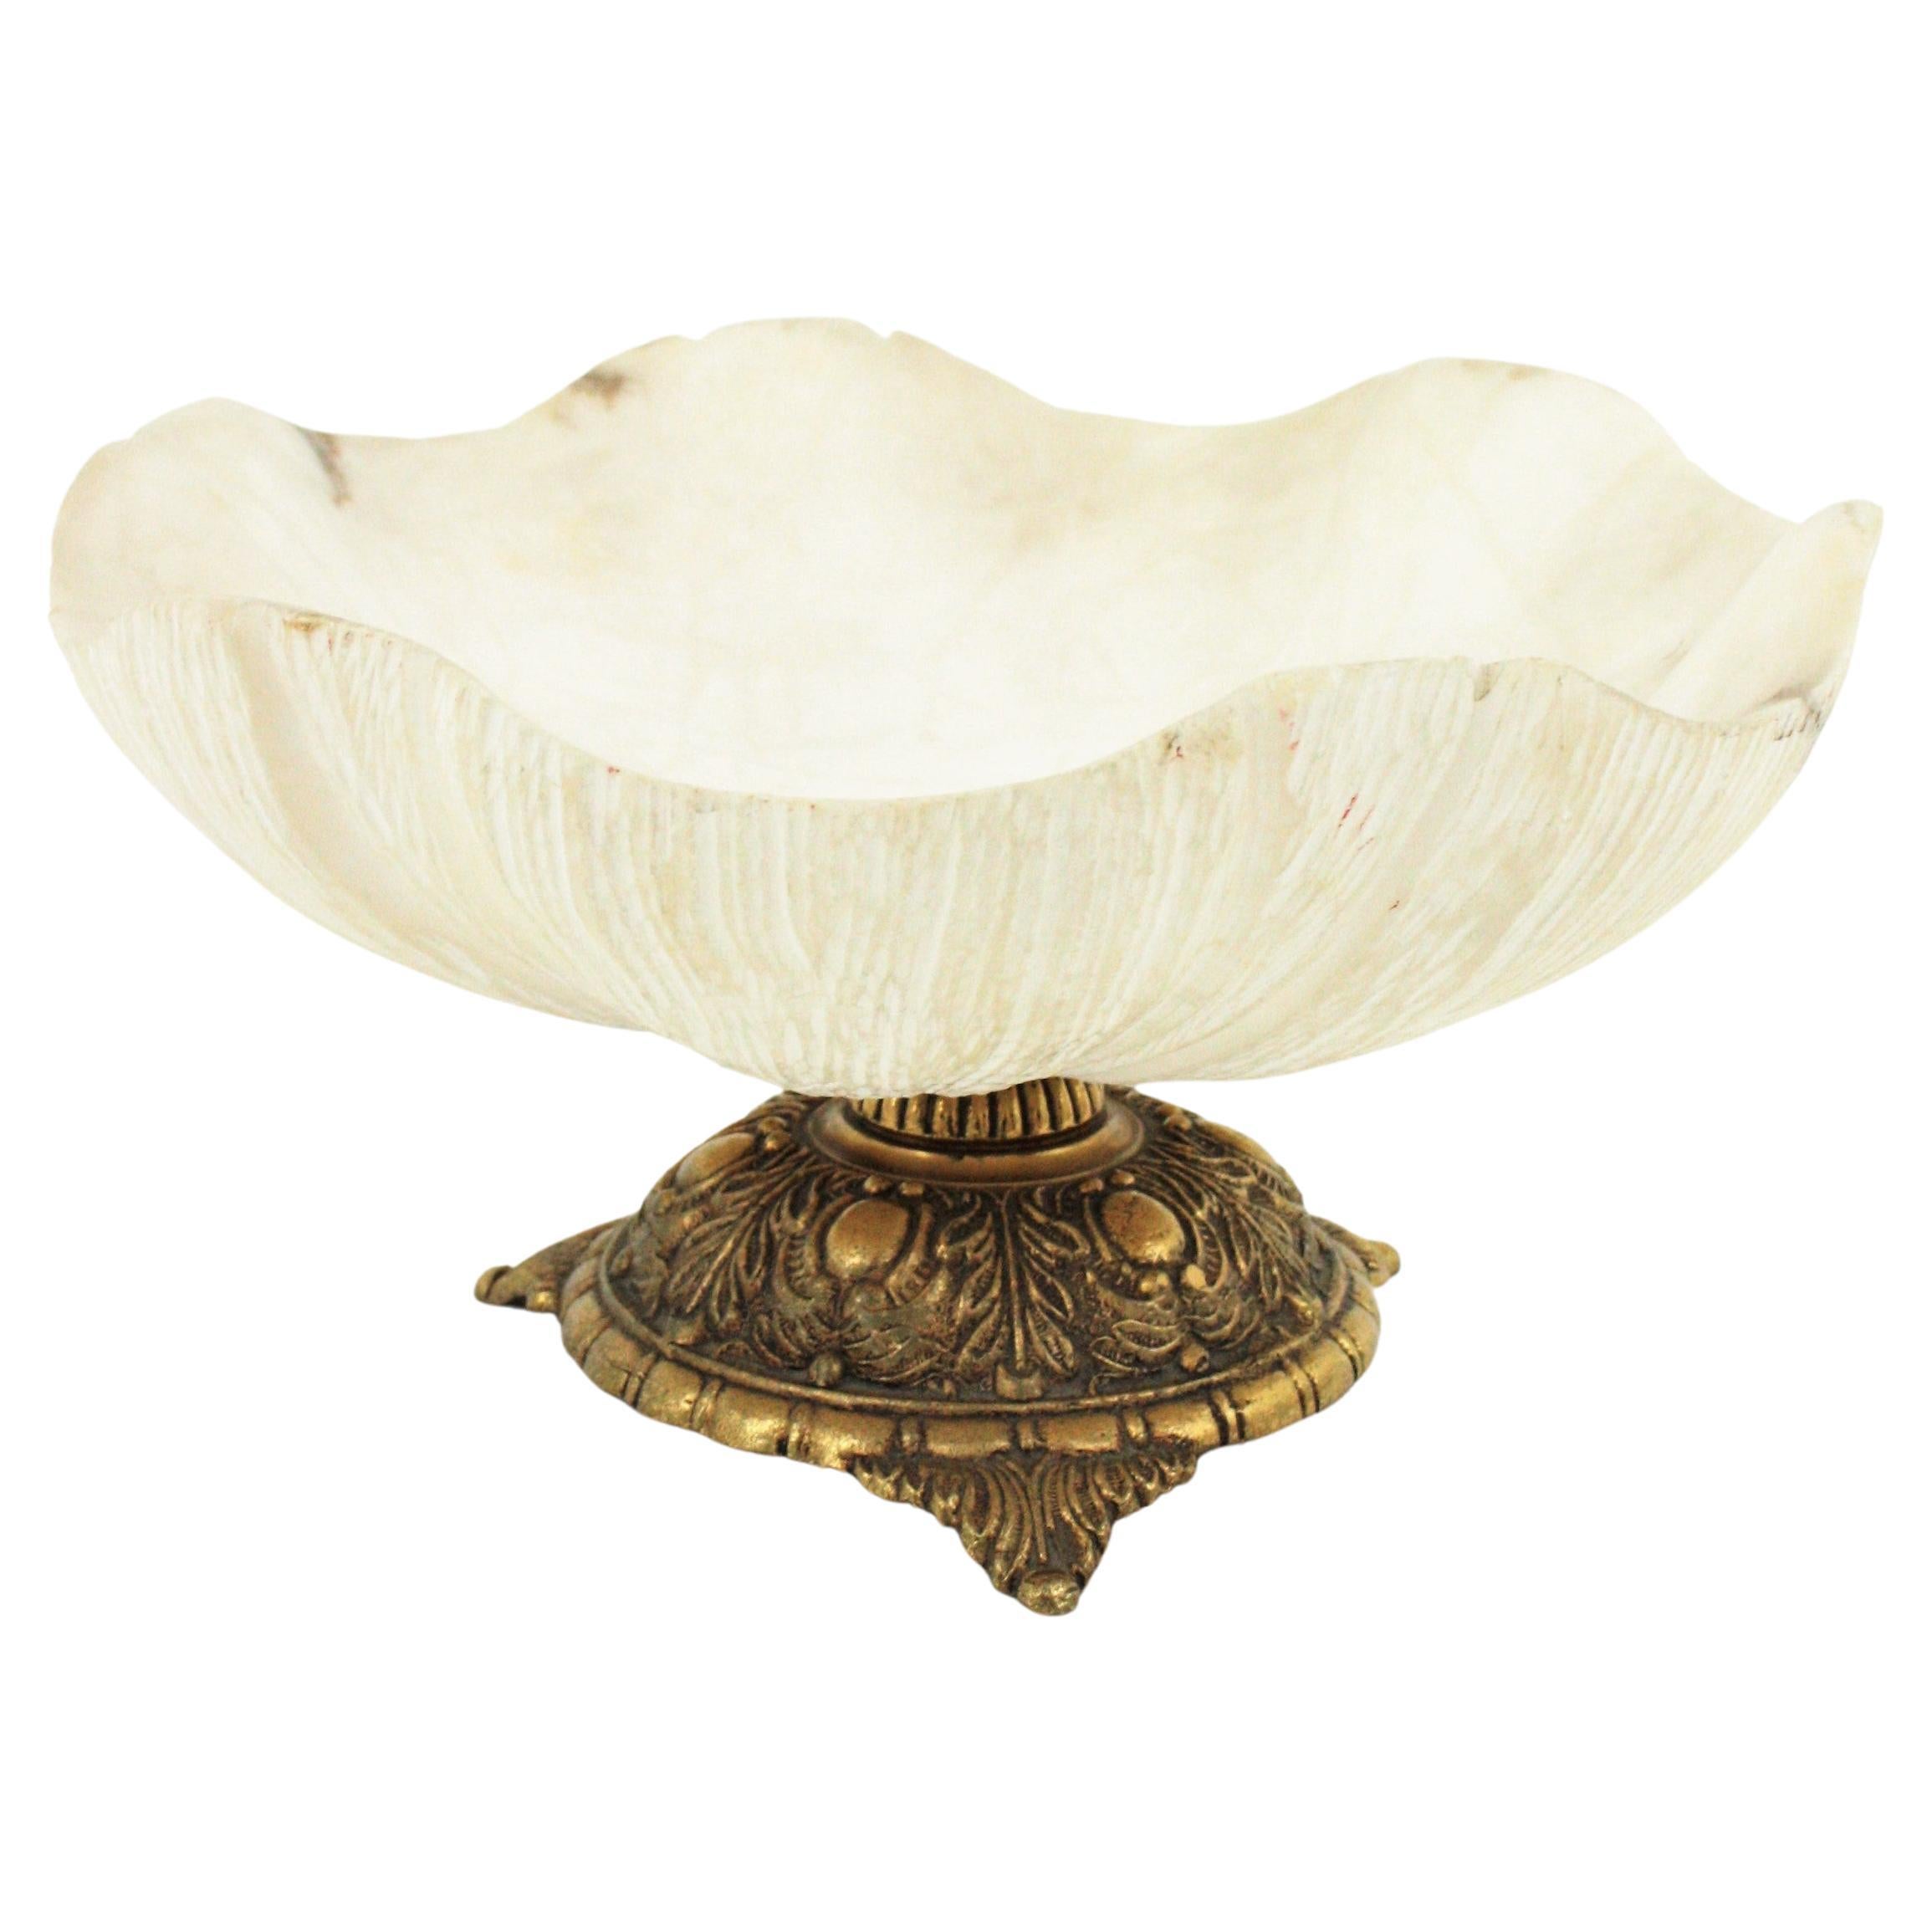 Outstanding centerpiece or footed bowl in carved alabaster and bronze. France, 1930s.
This carved alabaster centerpiece bowl stands up on a bronze base adorned with foliage details.
The alabaster surface has stripped carved decorations underneath